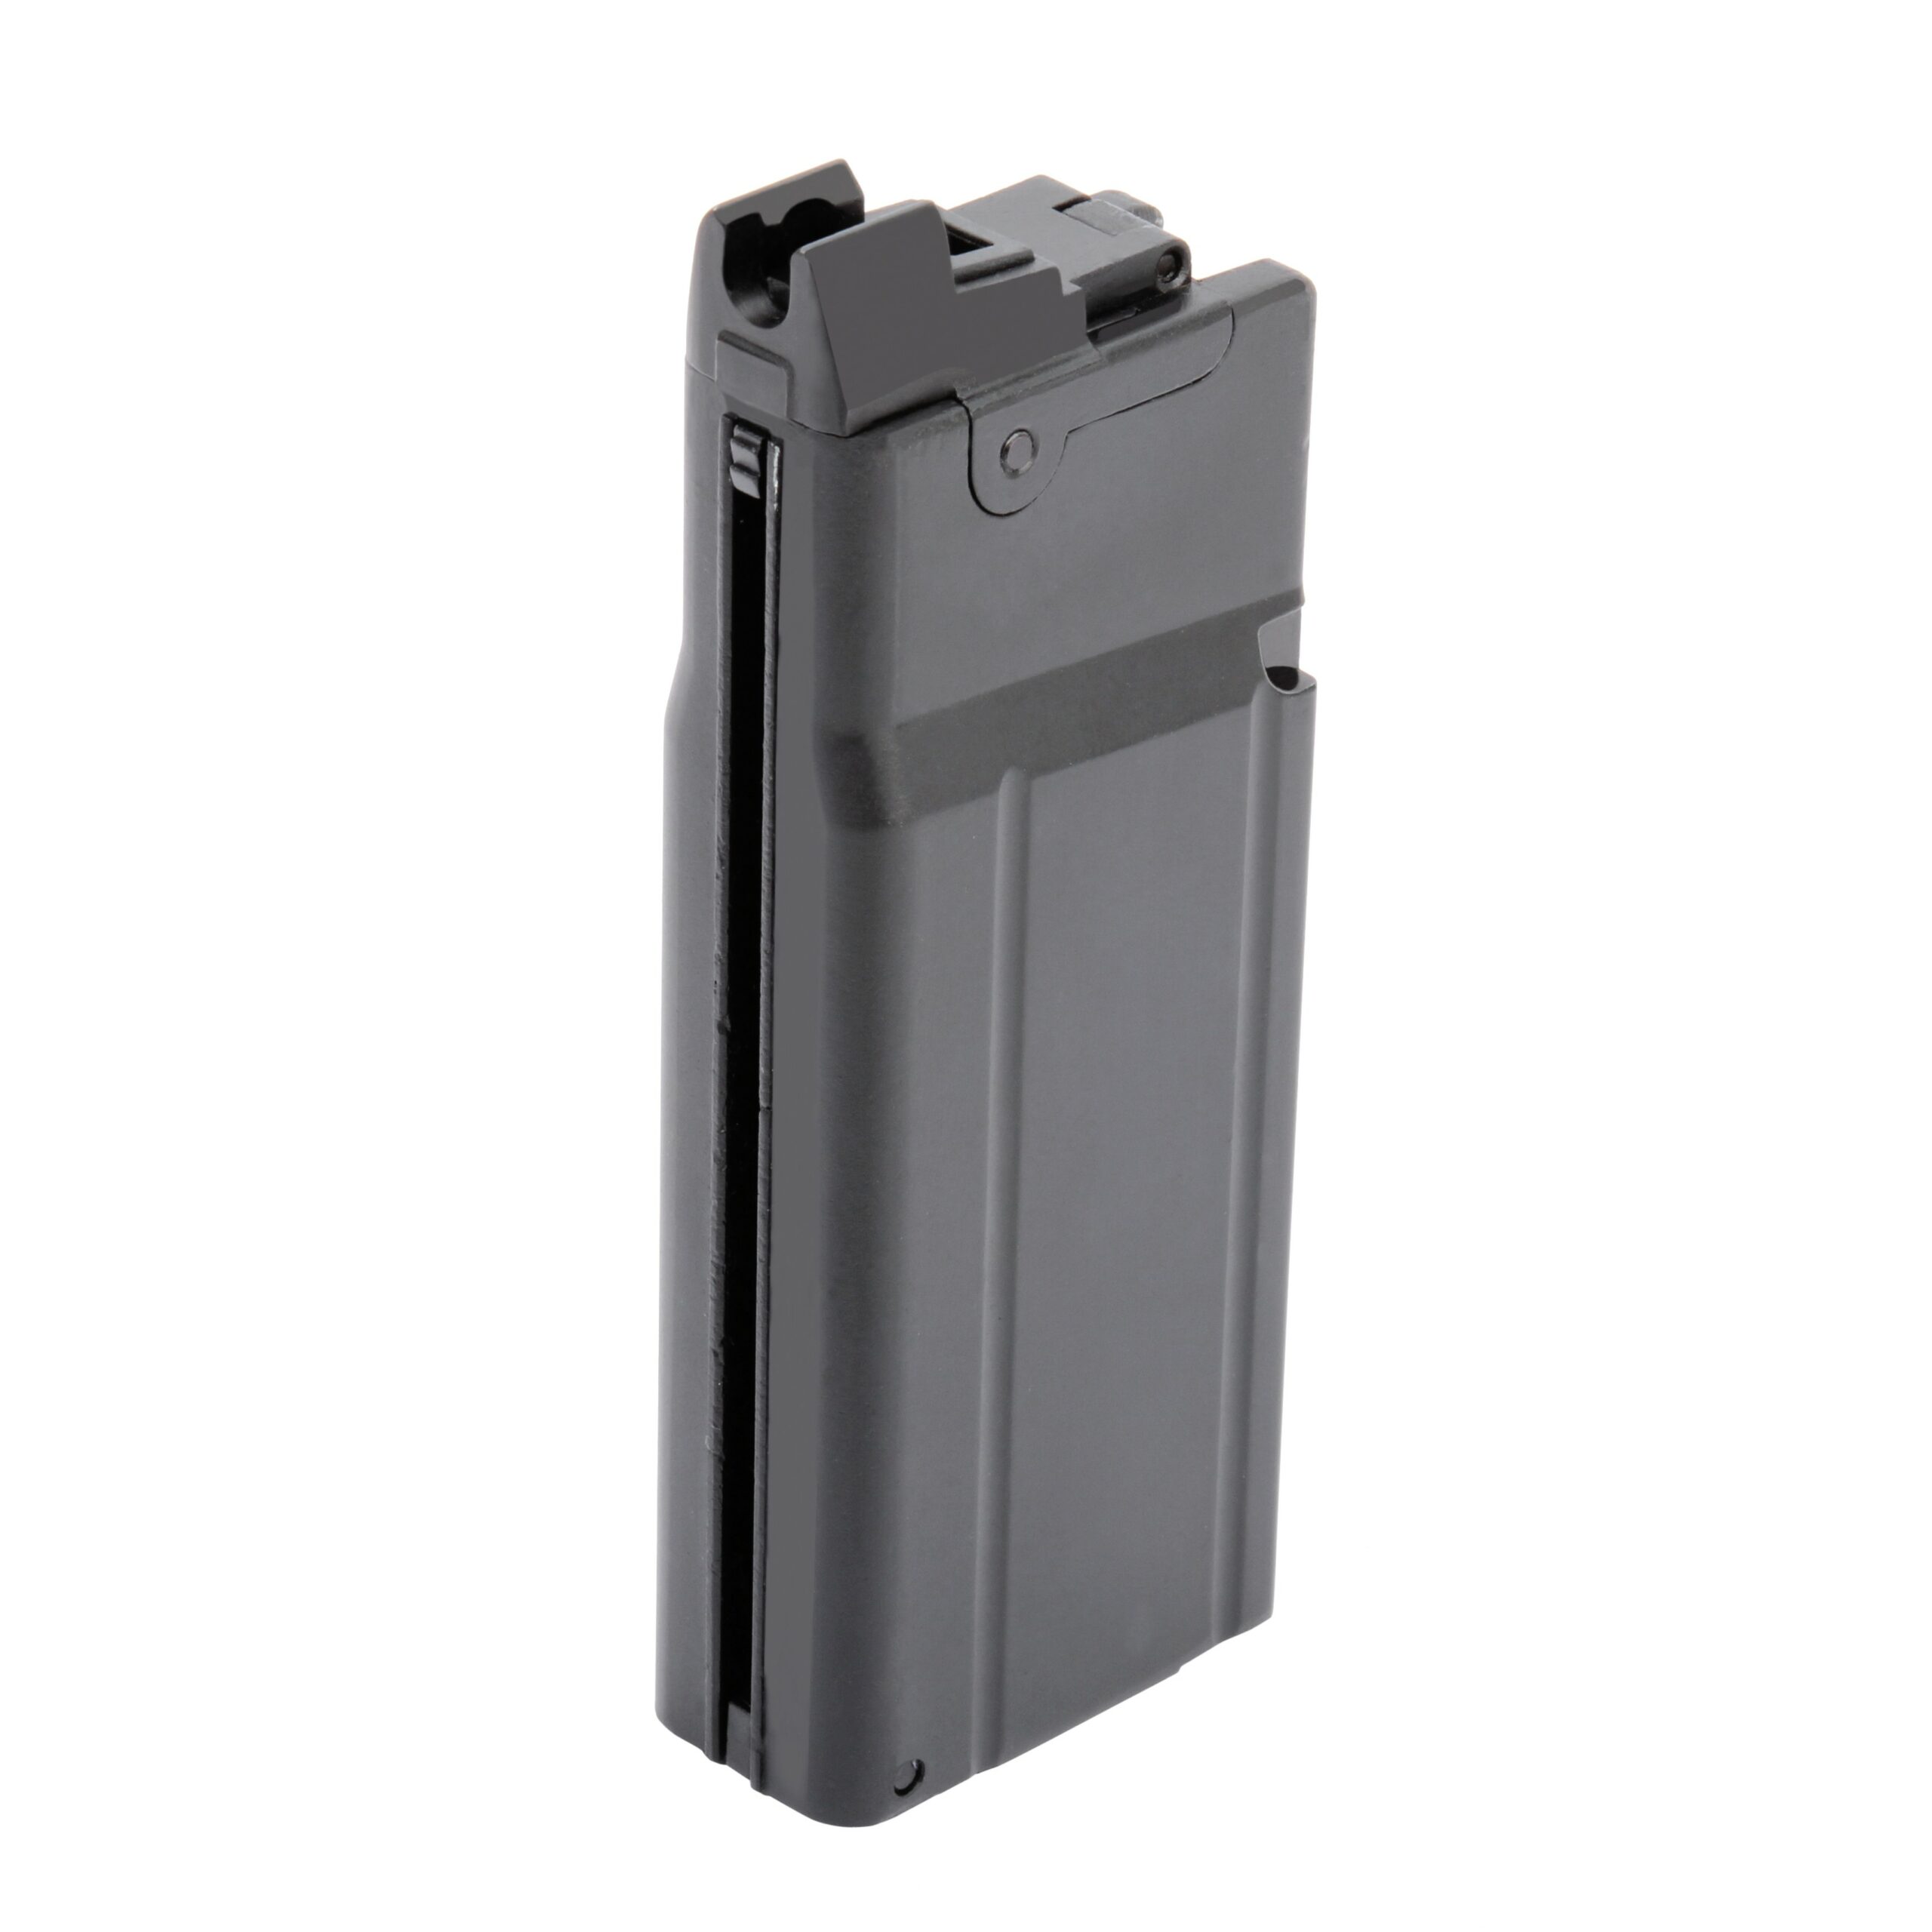 King Arms 15 rounds CO2 magazine for M1A1 Carbine Series